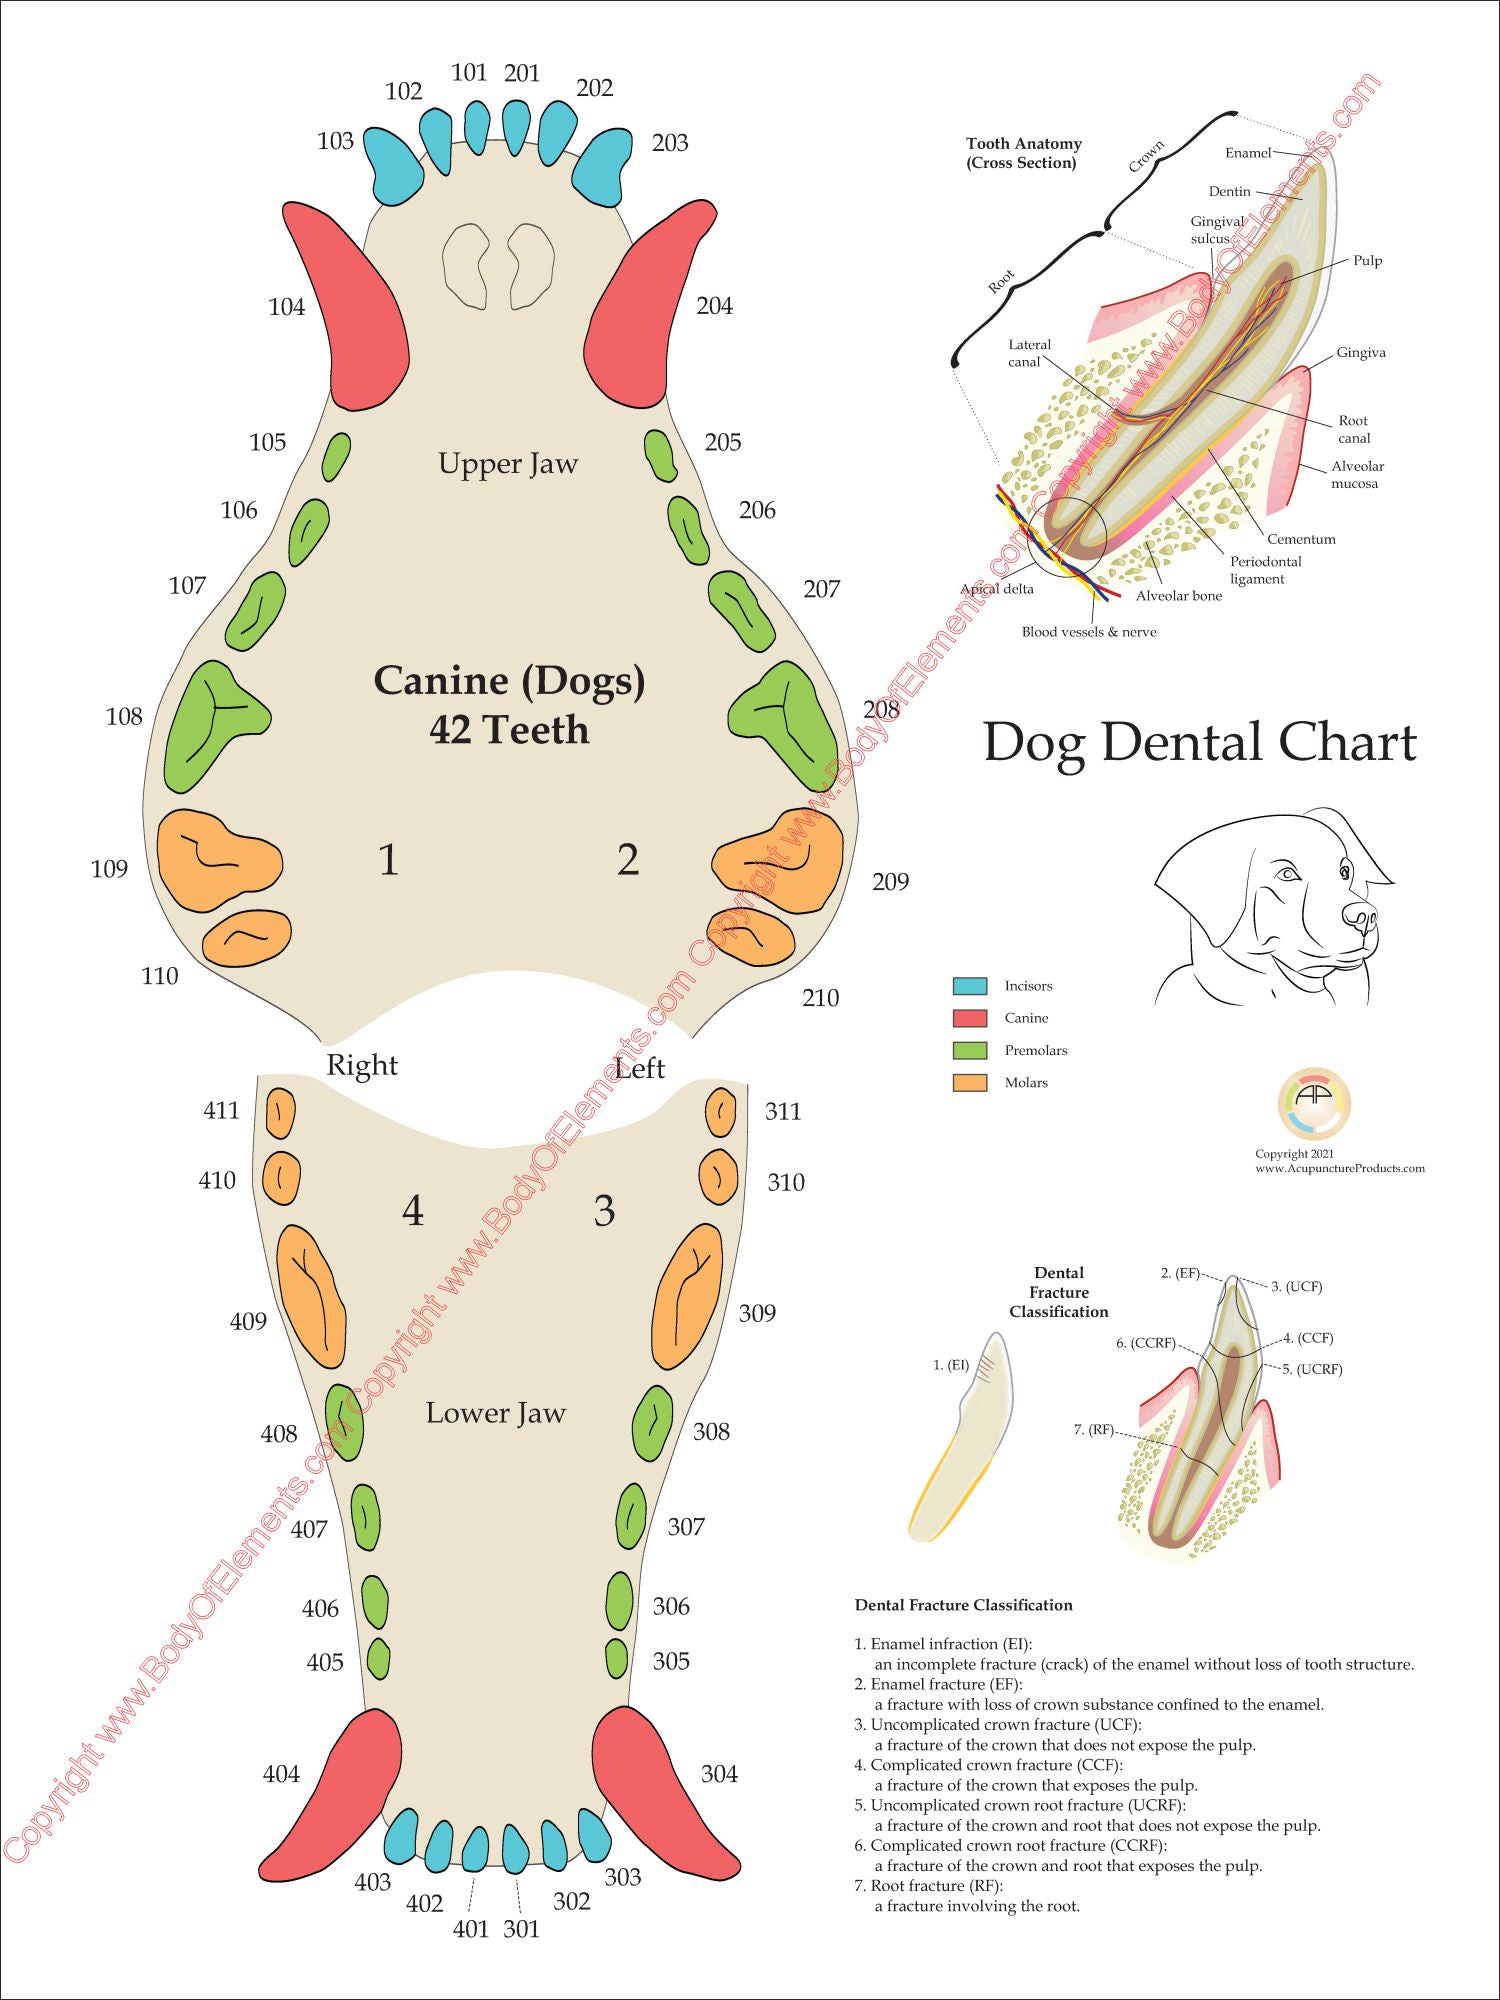 Dog dental tooth numbering system chart